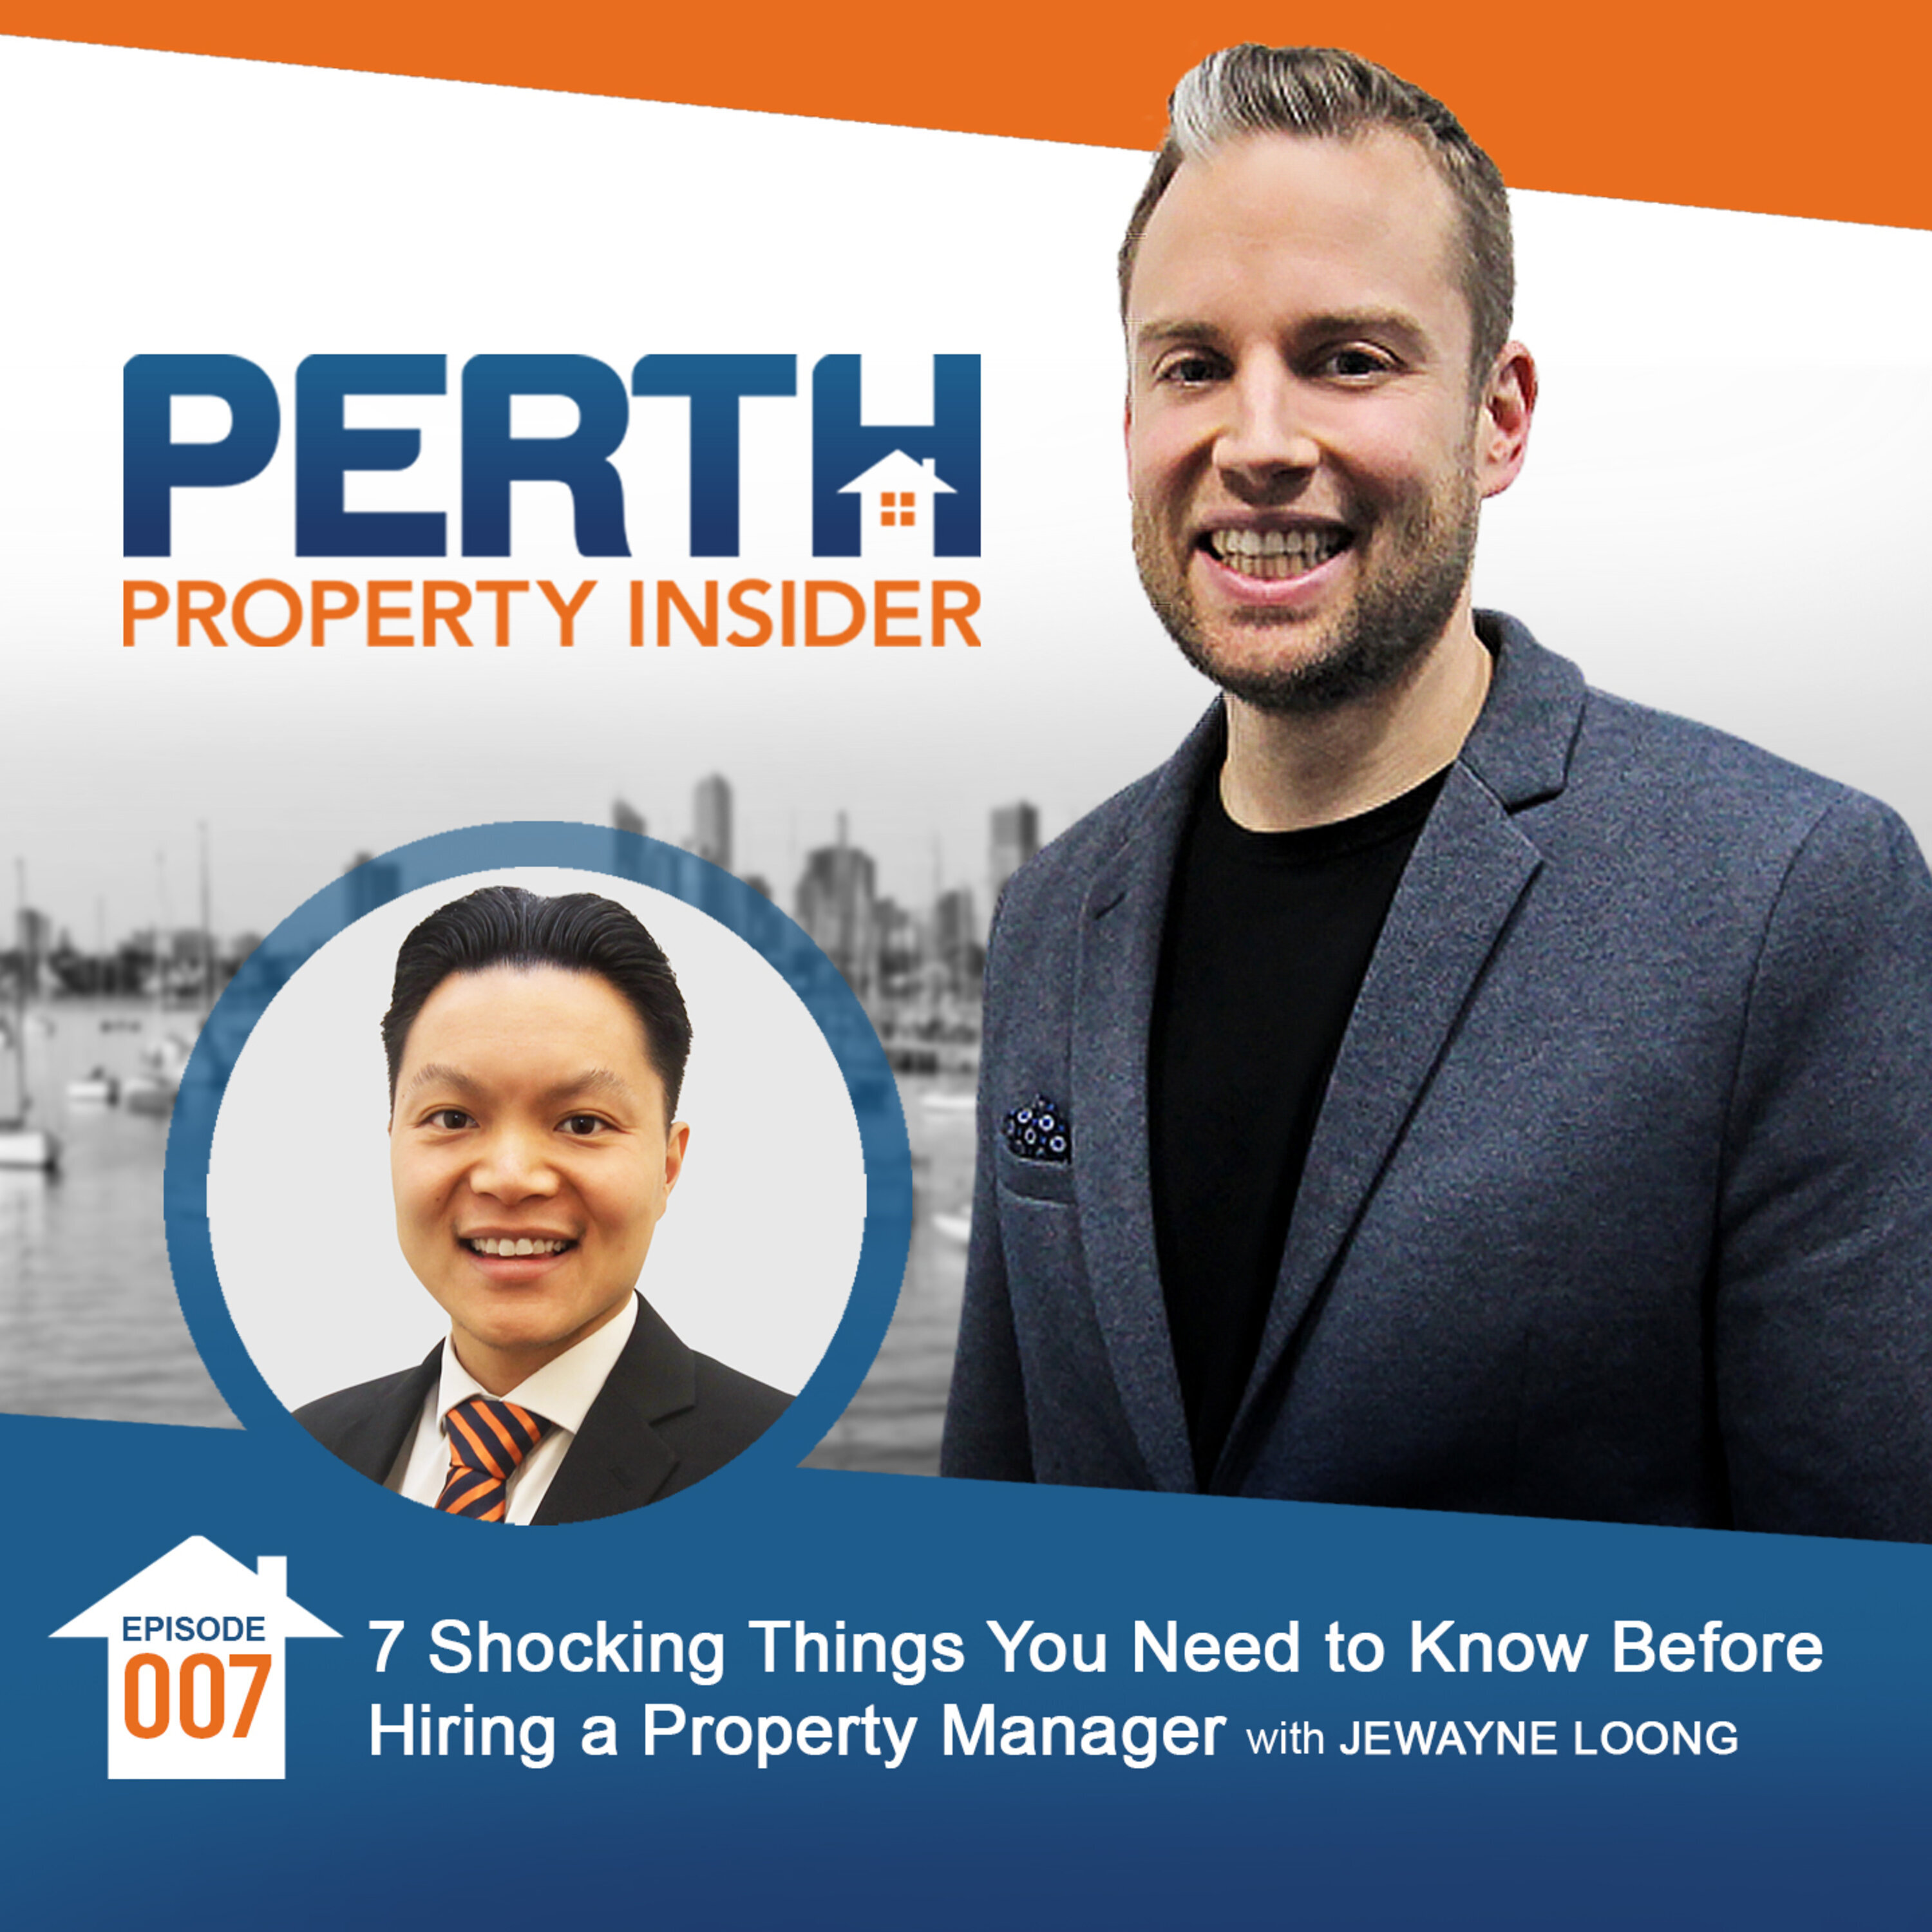 7 Shocking Things You Need to Know Before Hiring A Property Manager with Jewayne Loong